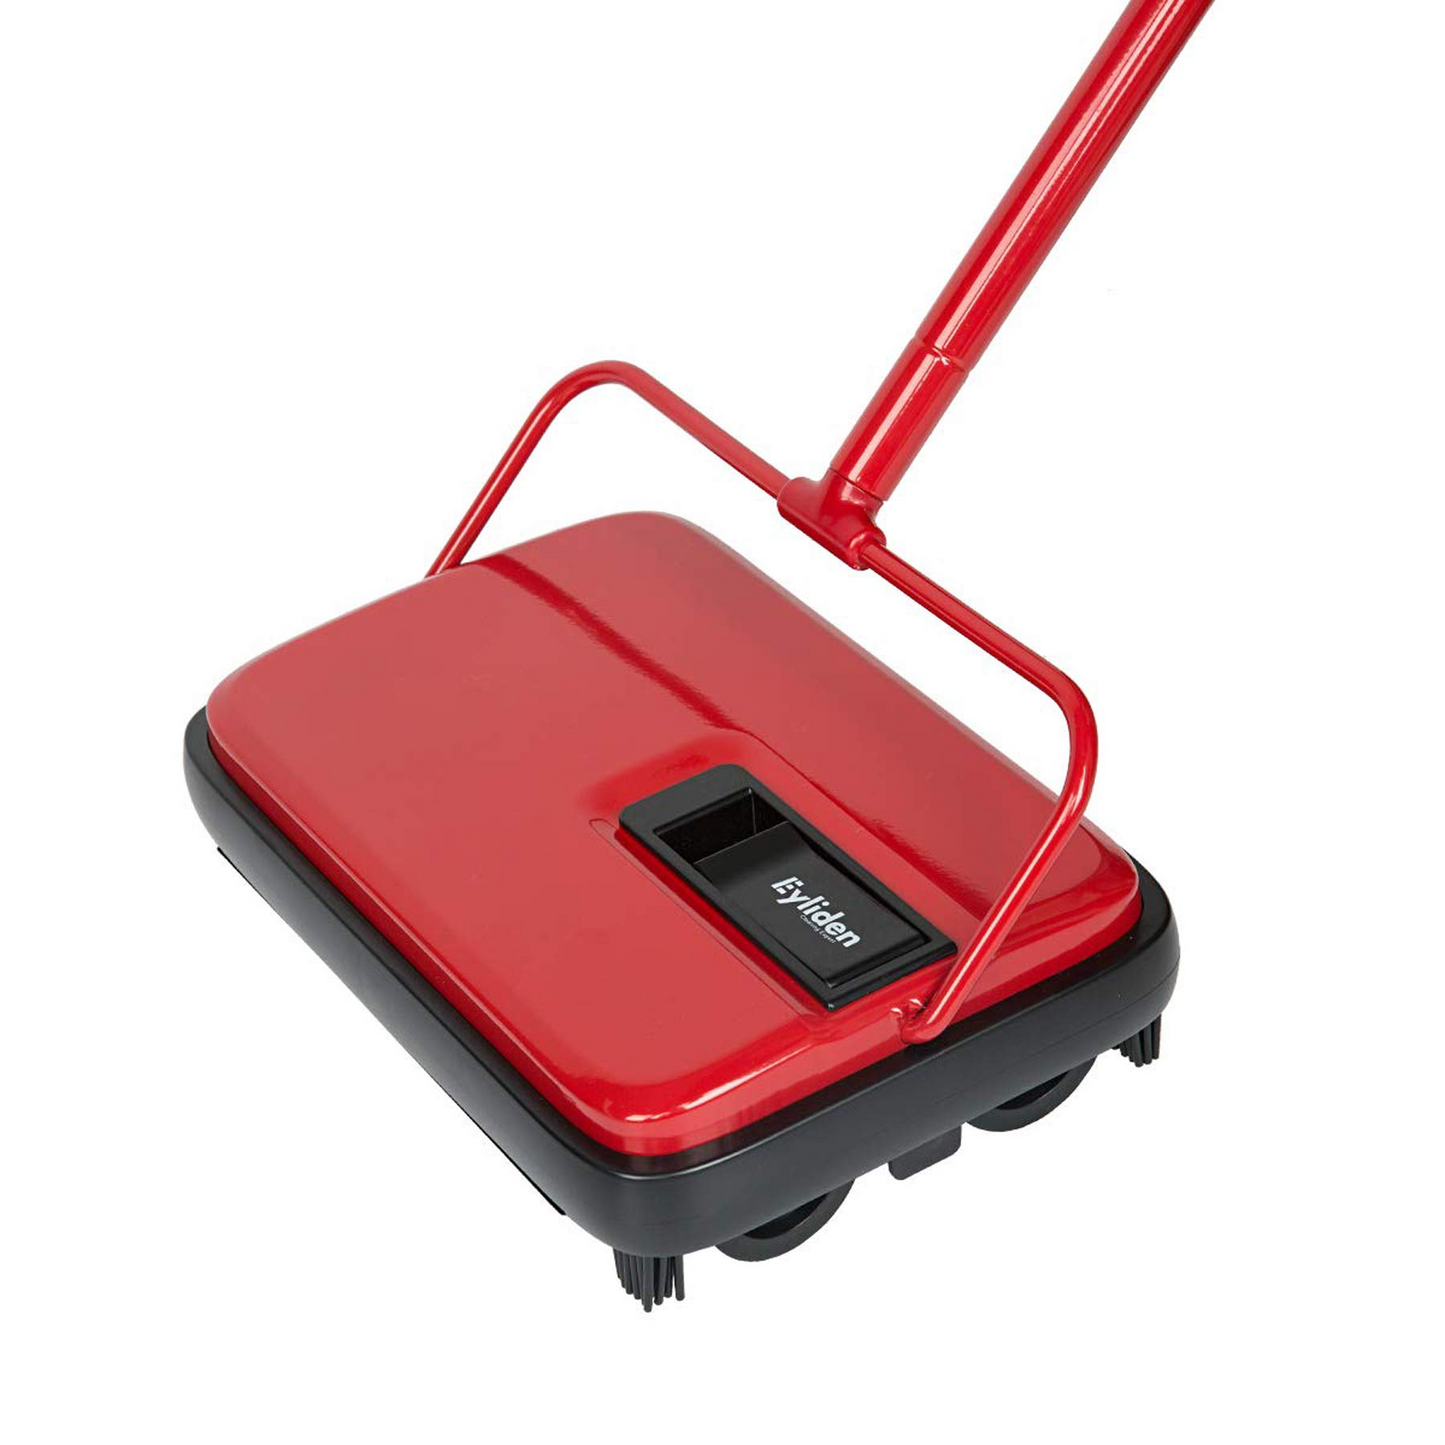 Eyliden Carpet Sweeper, Mini Size Lightweight Hand Push Carpet Sweepers - No Noise, Non-Electric - Easy Manual Sweeping, Automatic Compact Broom Only for Carpet Cleaning (Mint，Black，Red，White)